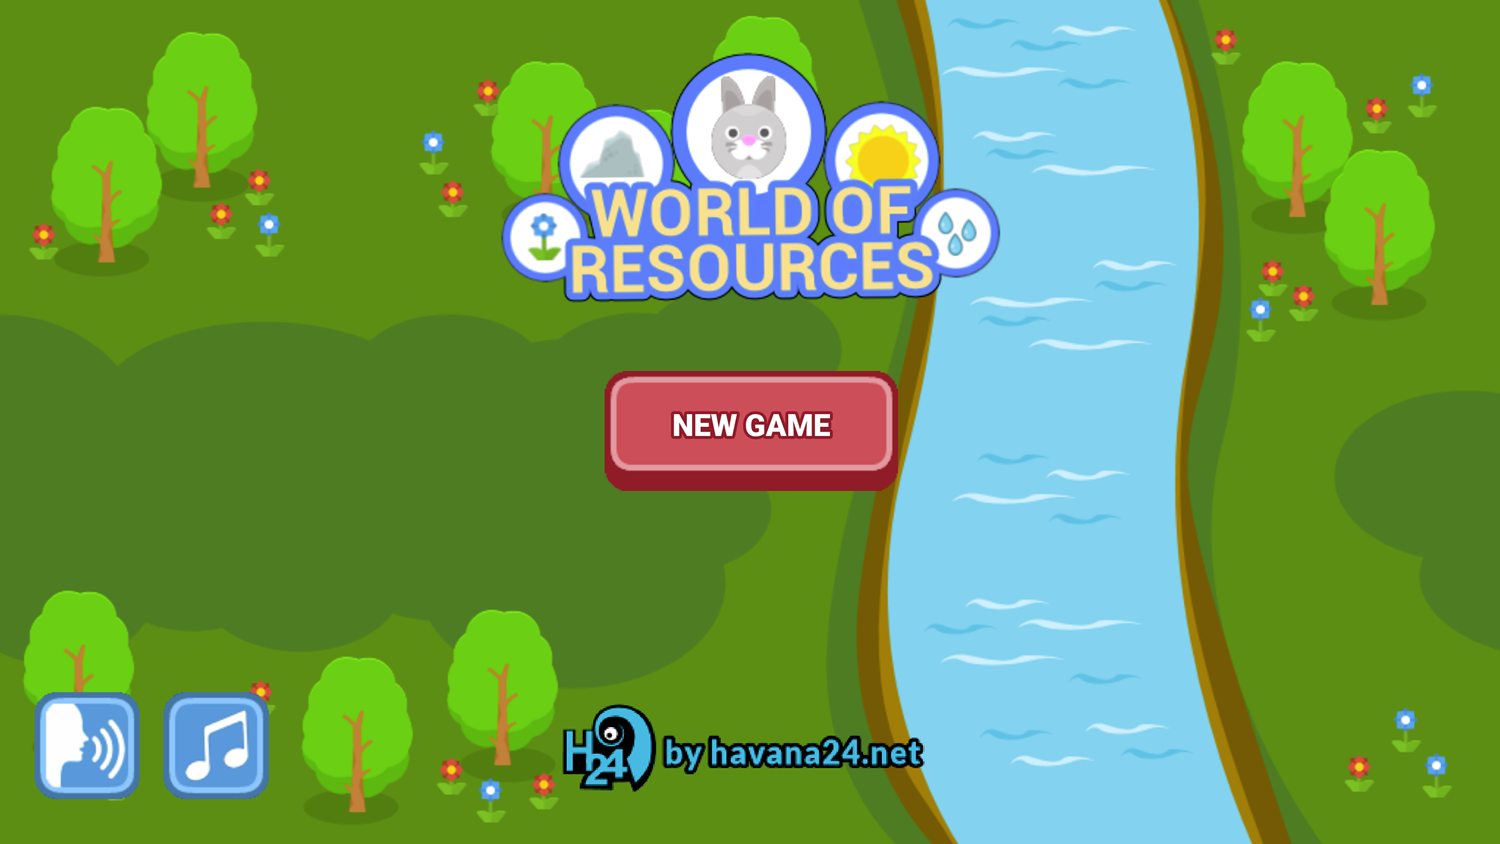 World of Resources Game Welcome Screen Screenshot.